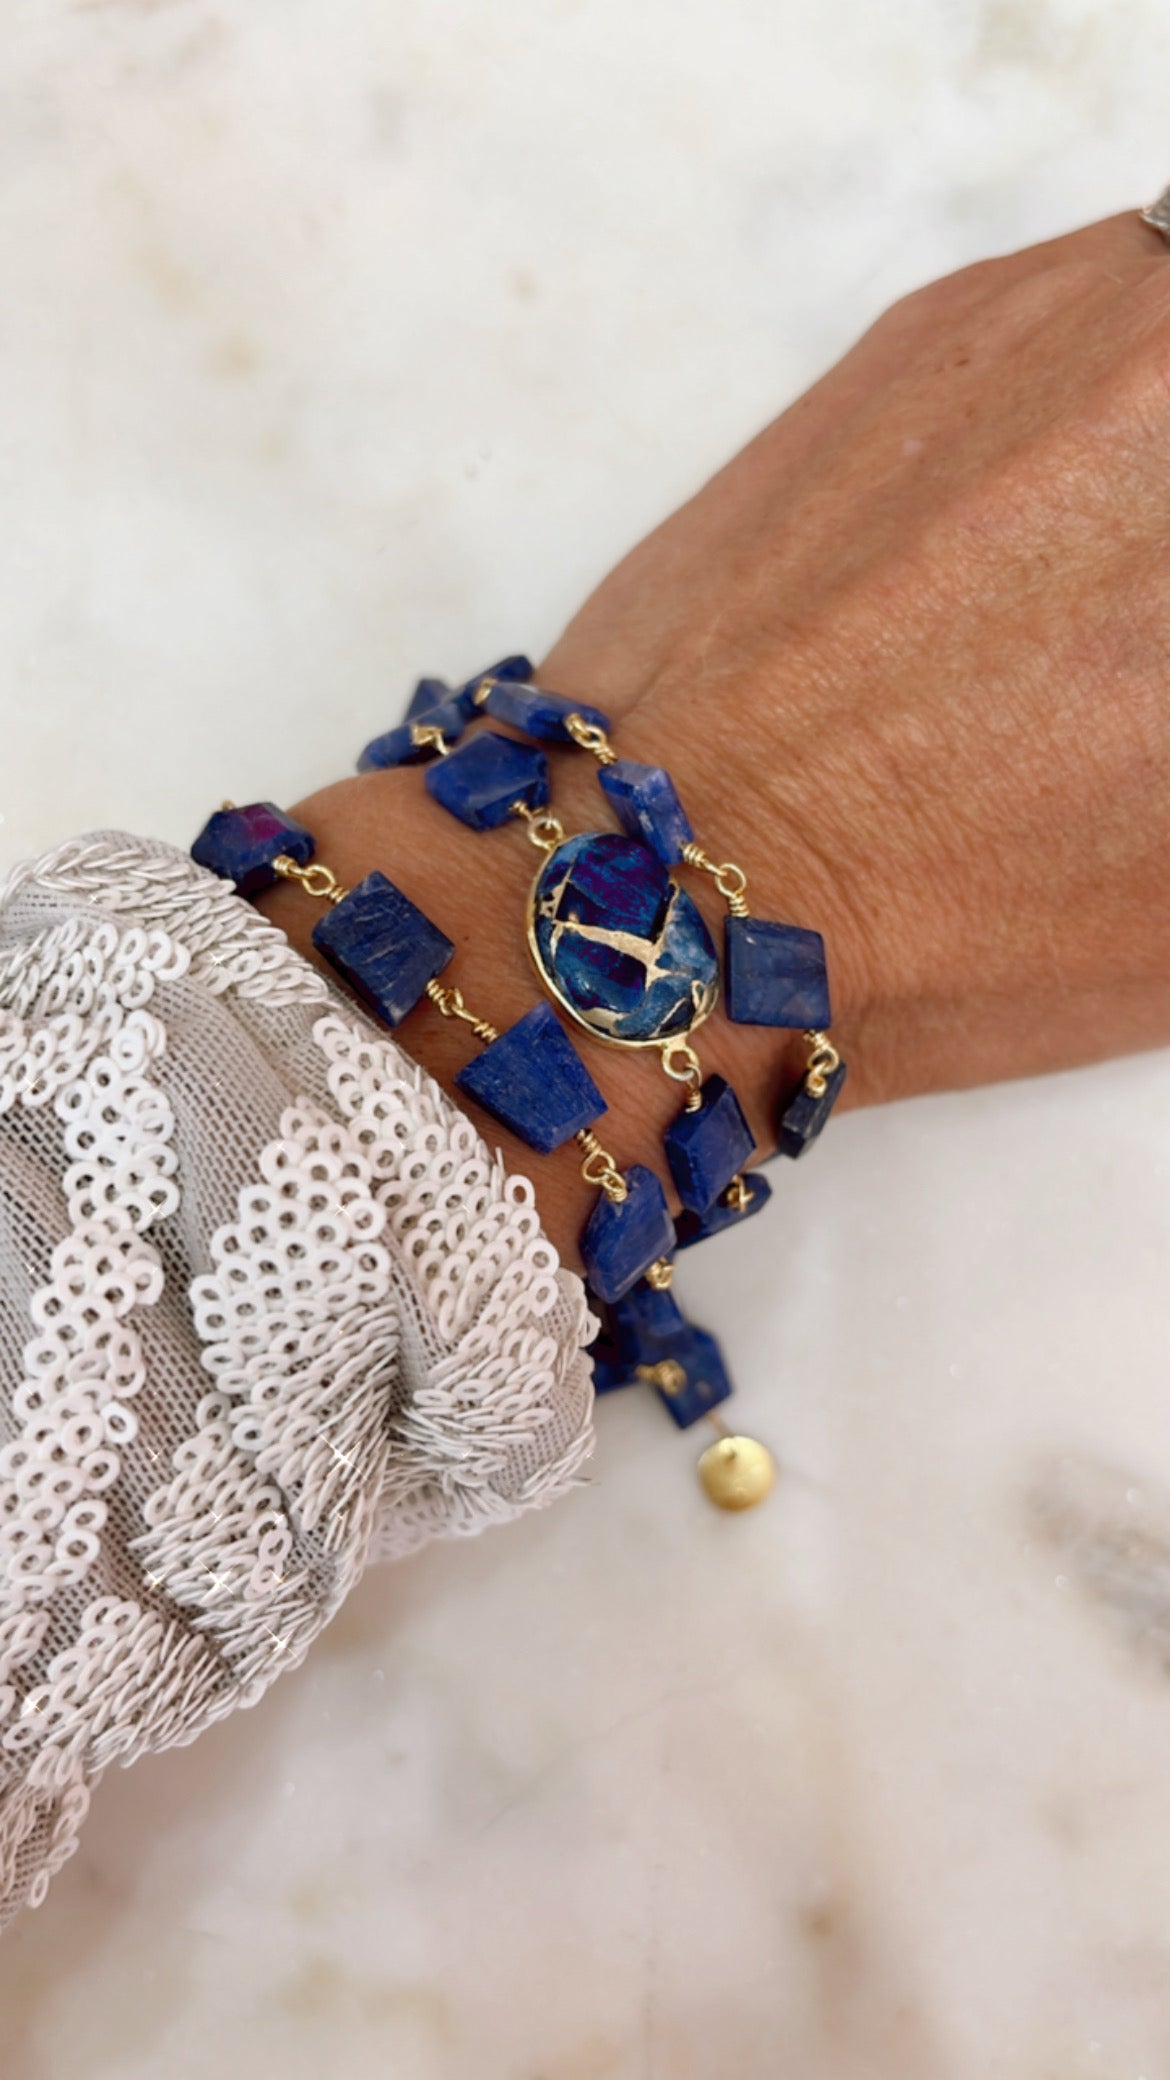 Hana Wrap Bracelet/Necklace in Blue Mojave Copper Turquoise - Chunky Stone